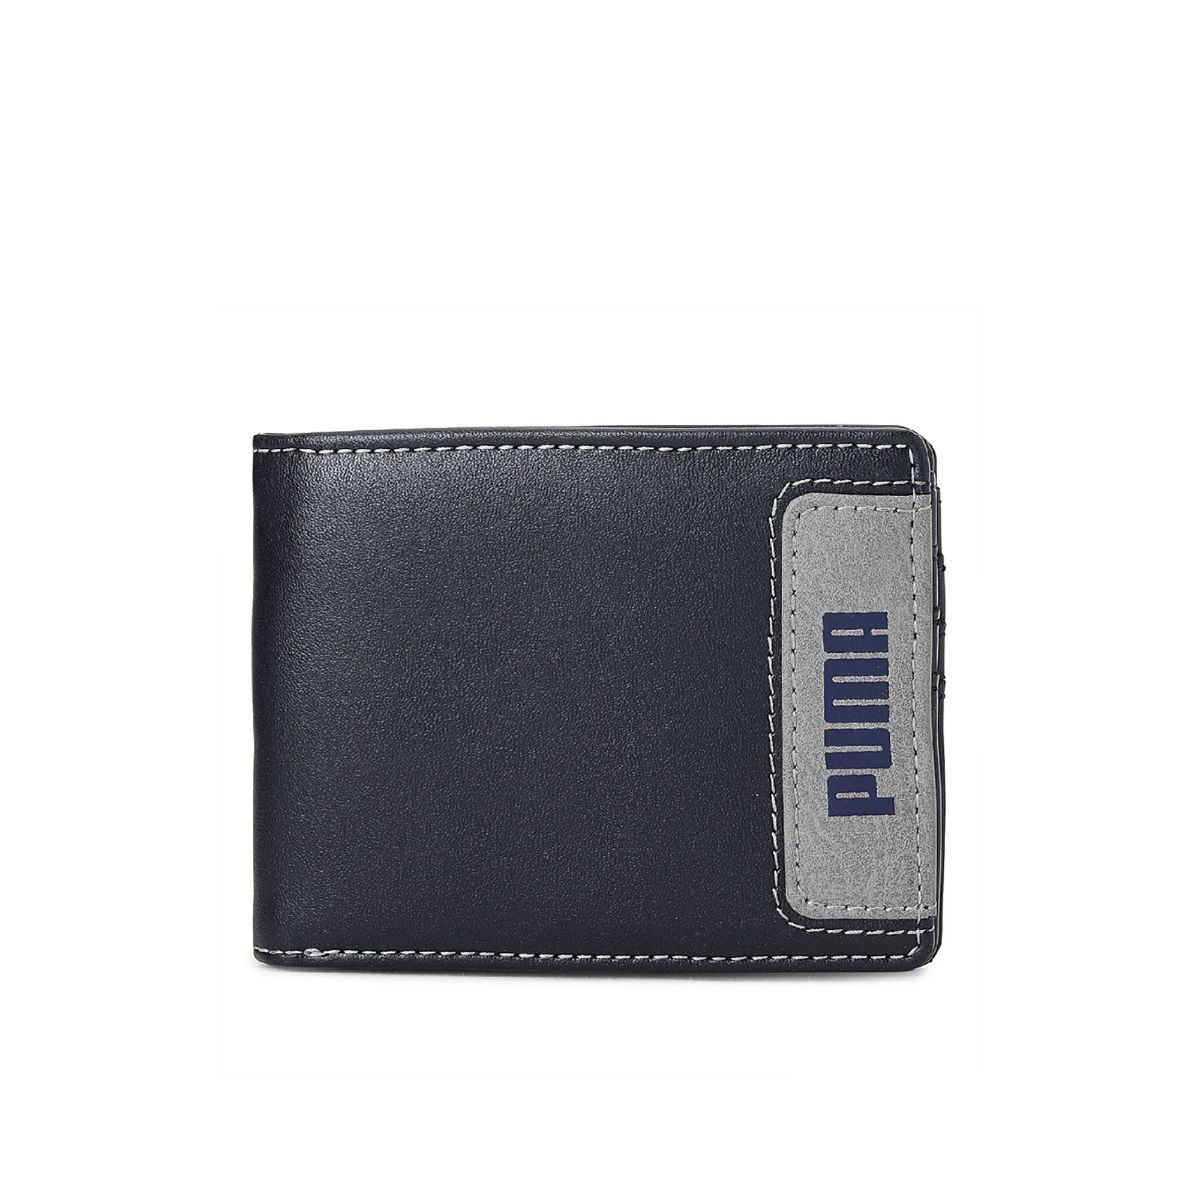 PUMA Ferrari Ls Wallet 053854_01 in Chennai at best price by Bagister -  Justdial